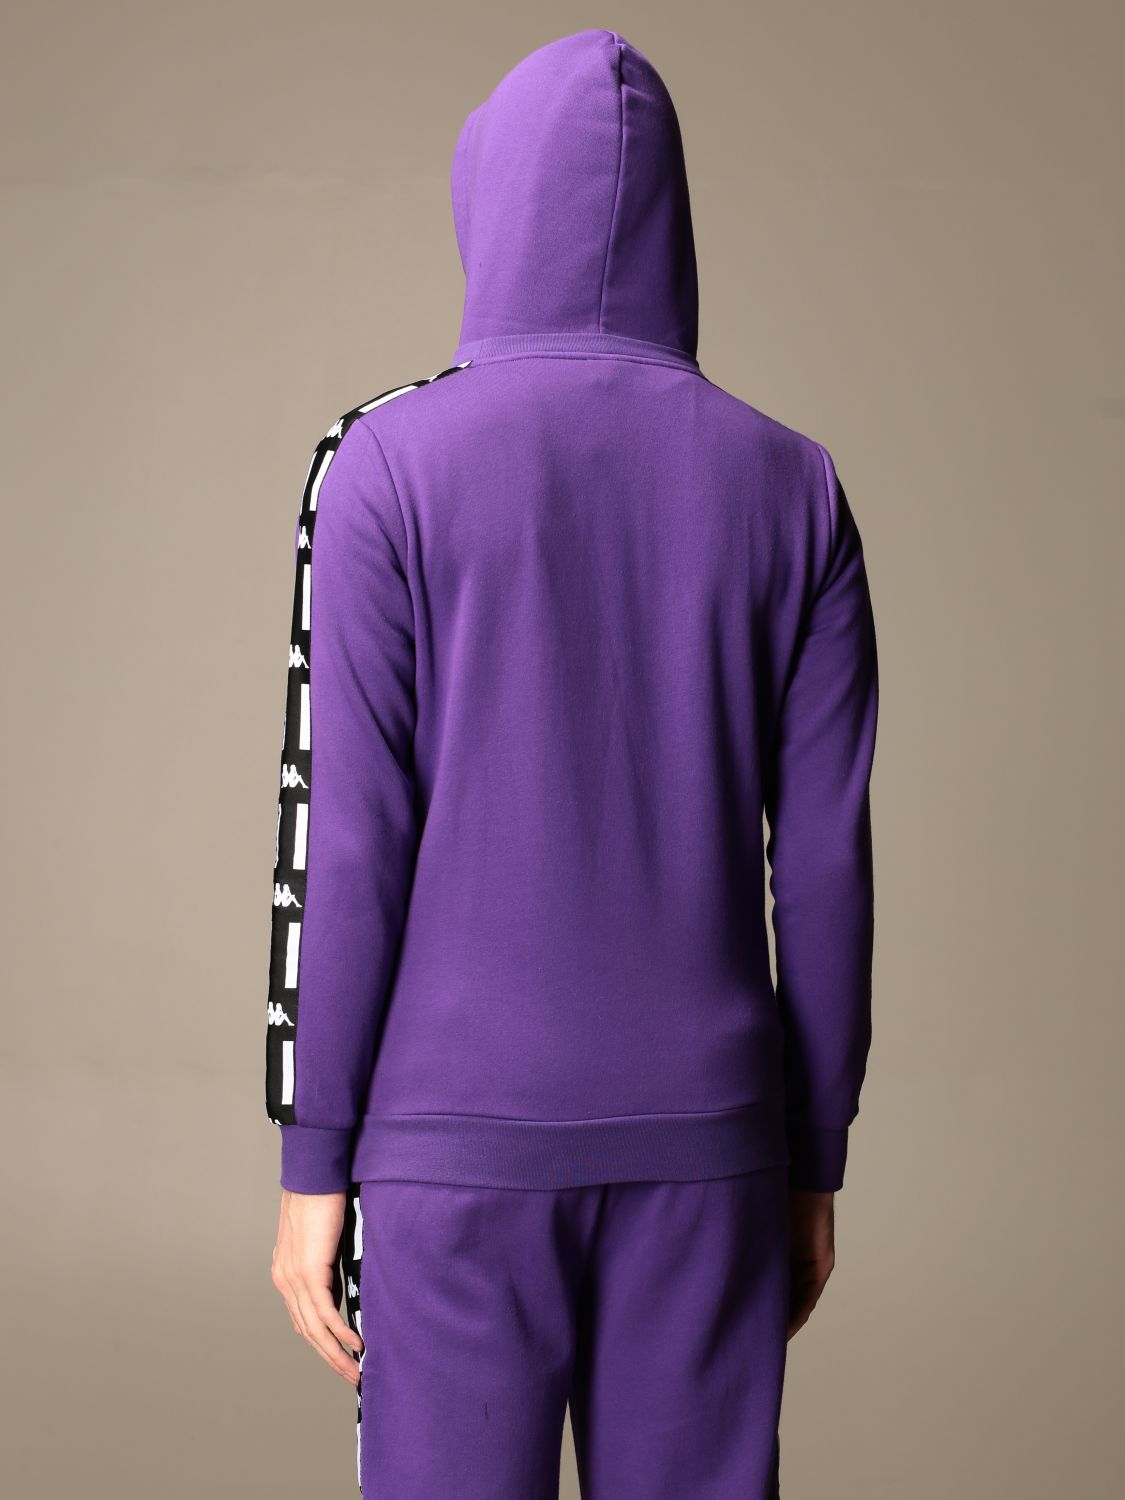 Kappa Outlet: Authentic USA hoodie with logo - Violet | Kappa sweatshirt  31114LW online on GIGLIO.COM